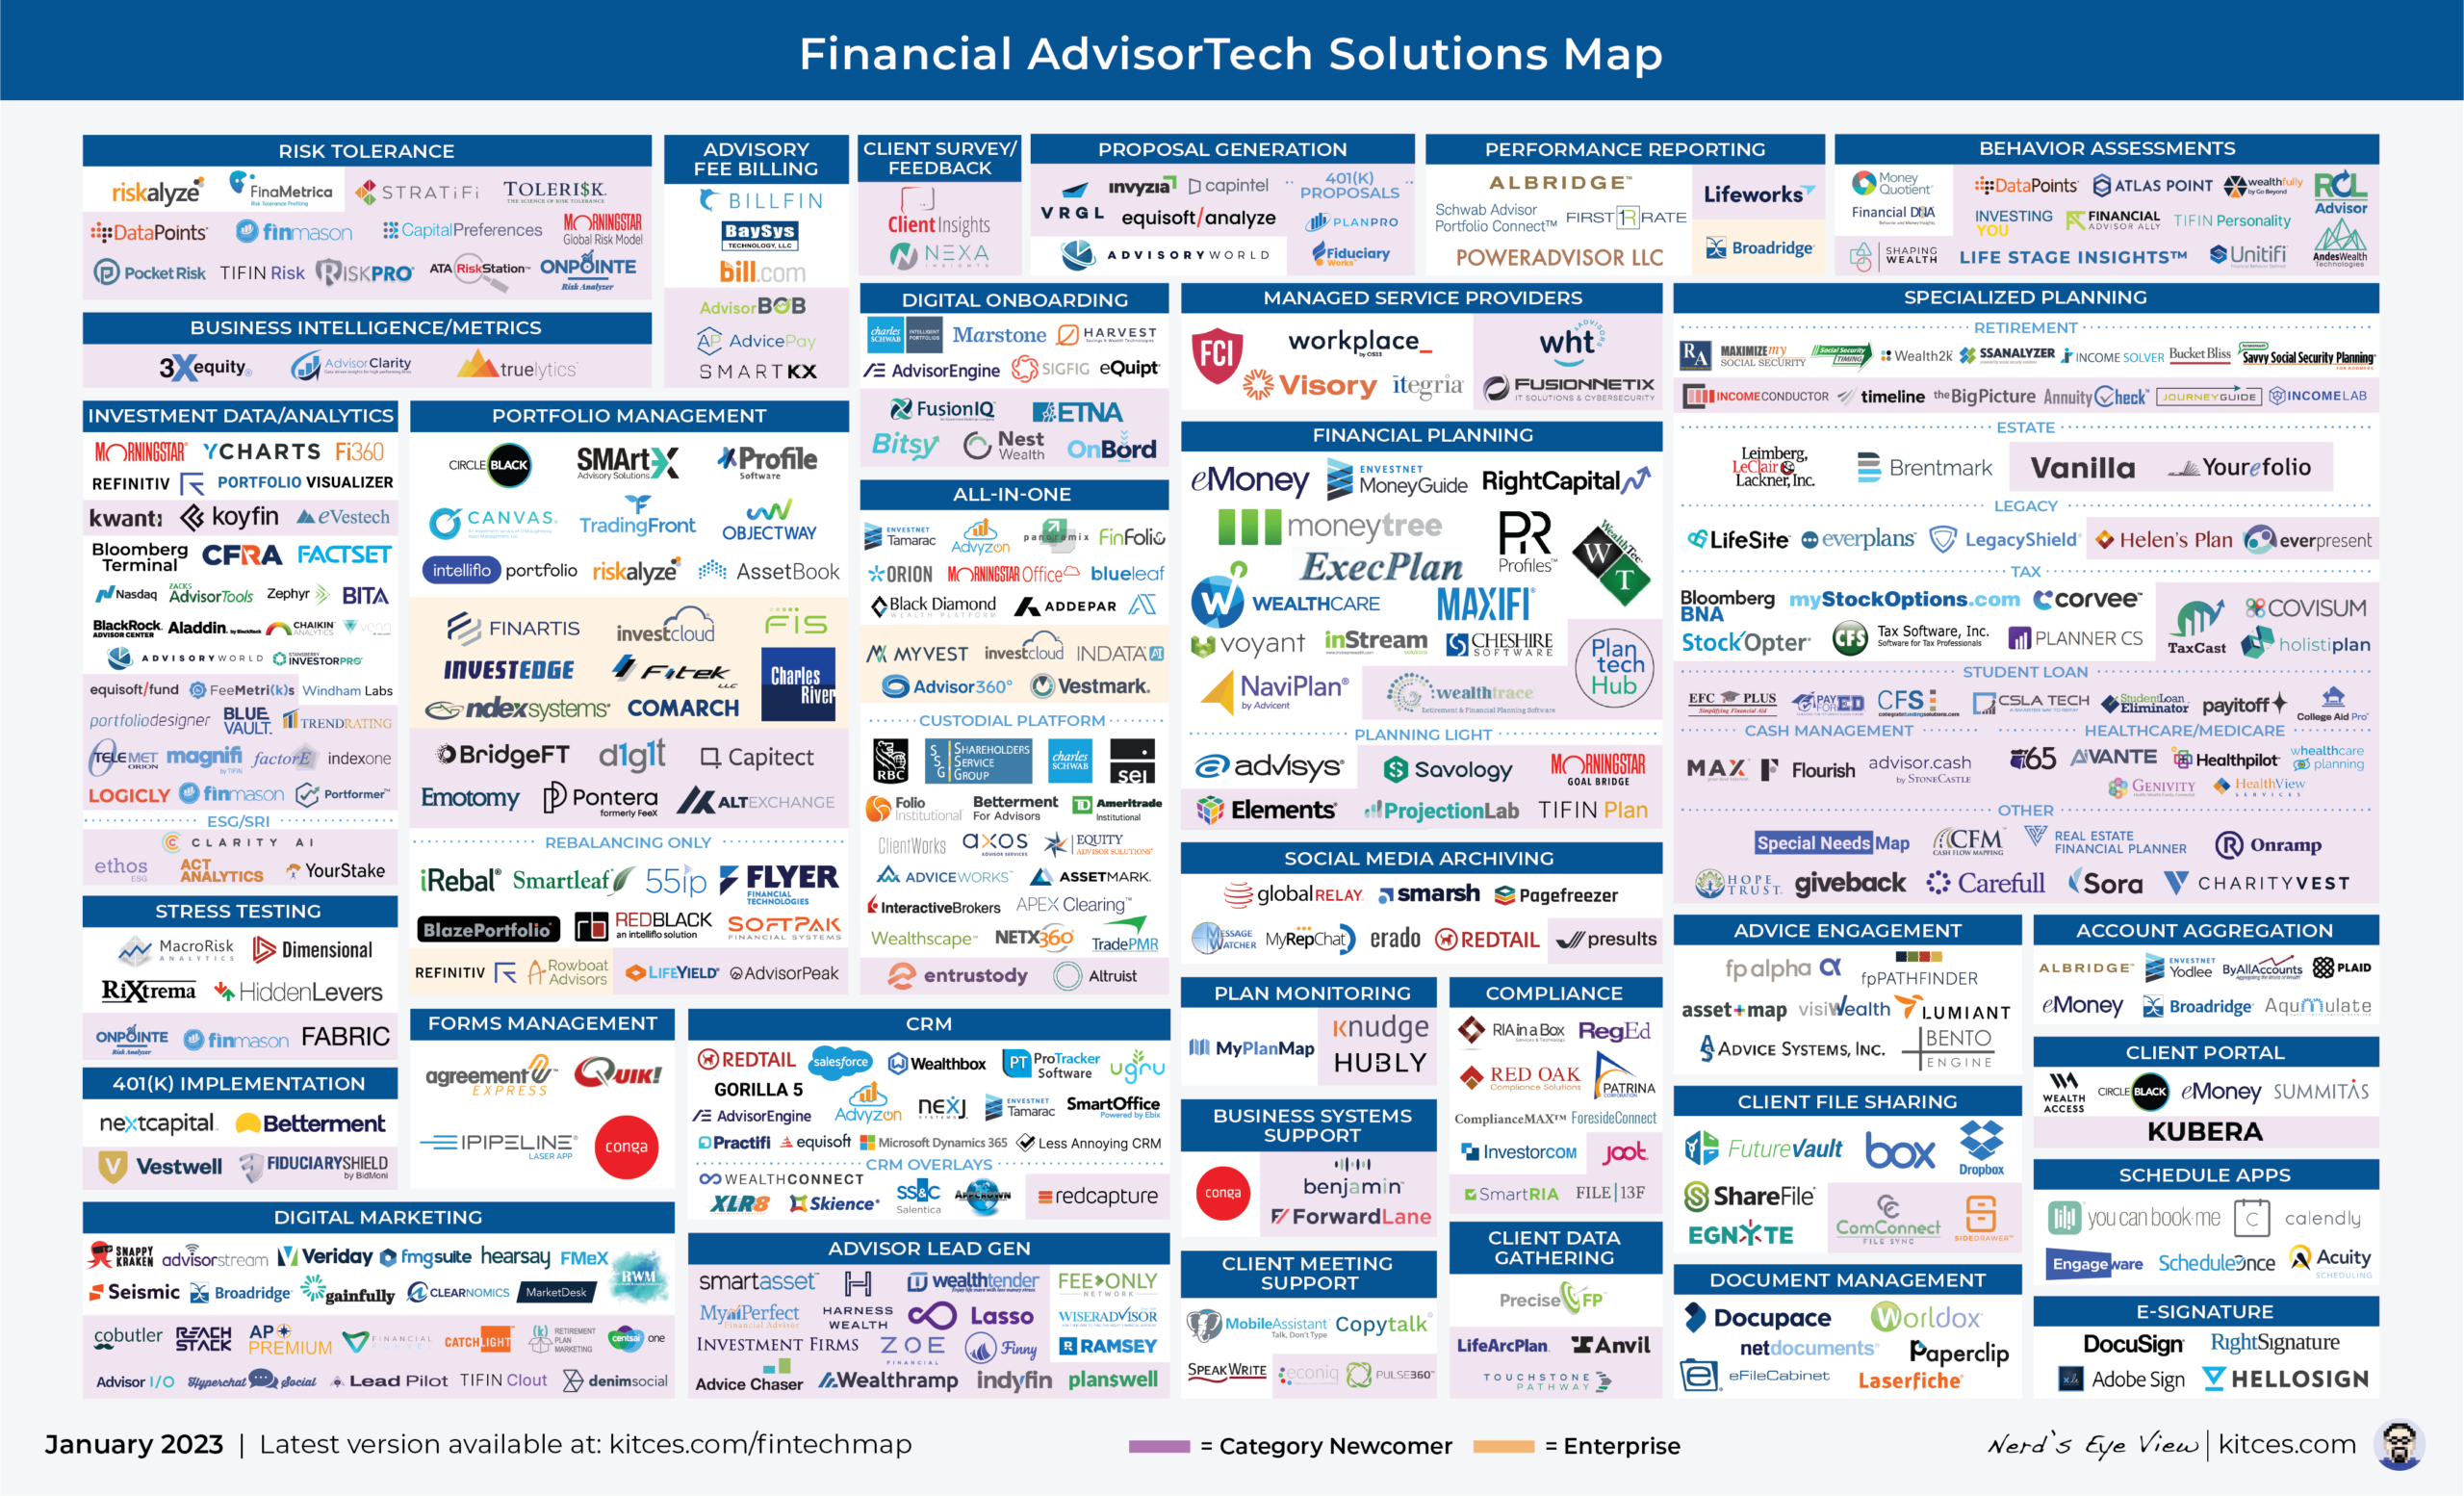 The Latest In Financial #AdvisorTech (January 2023)